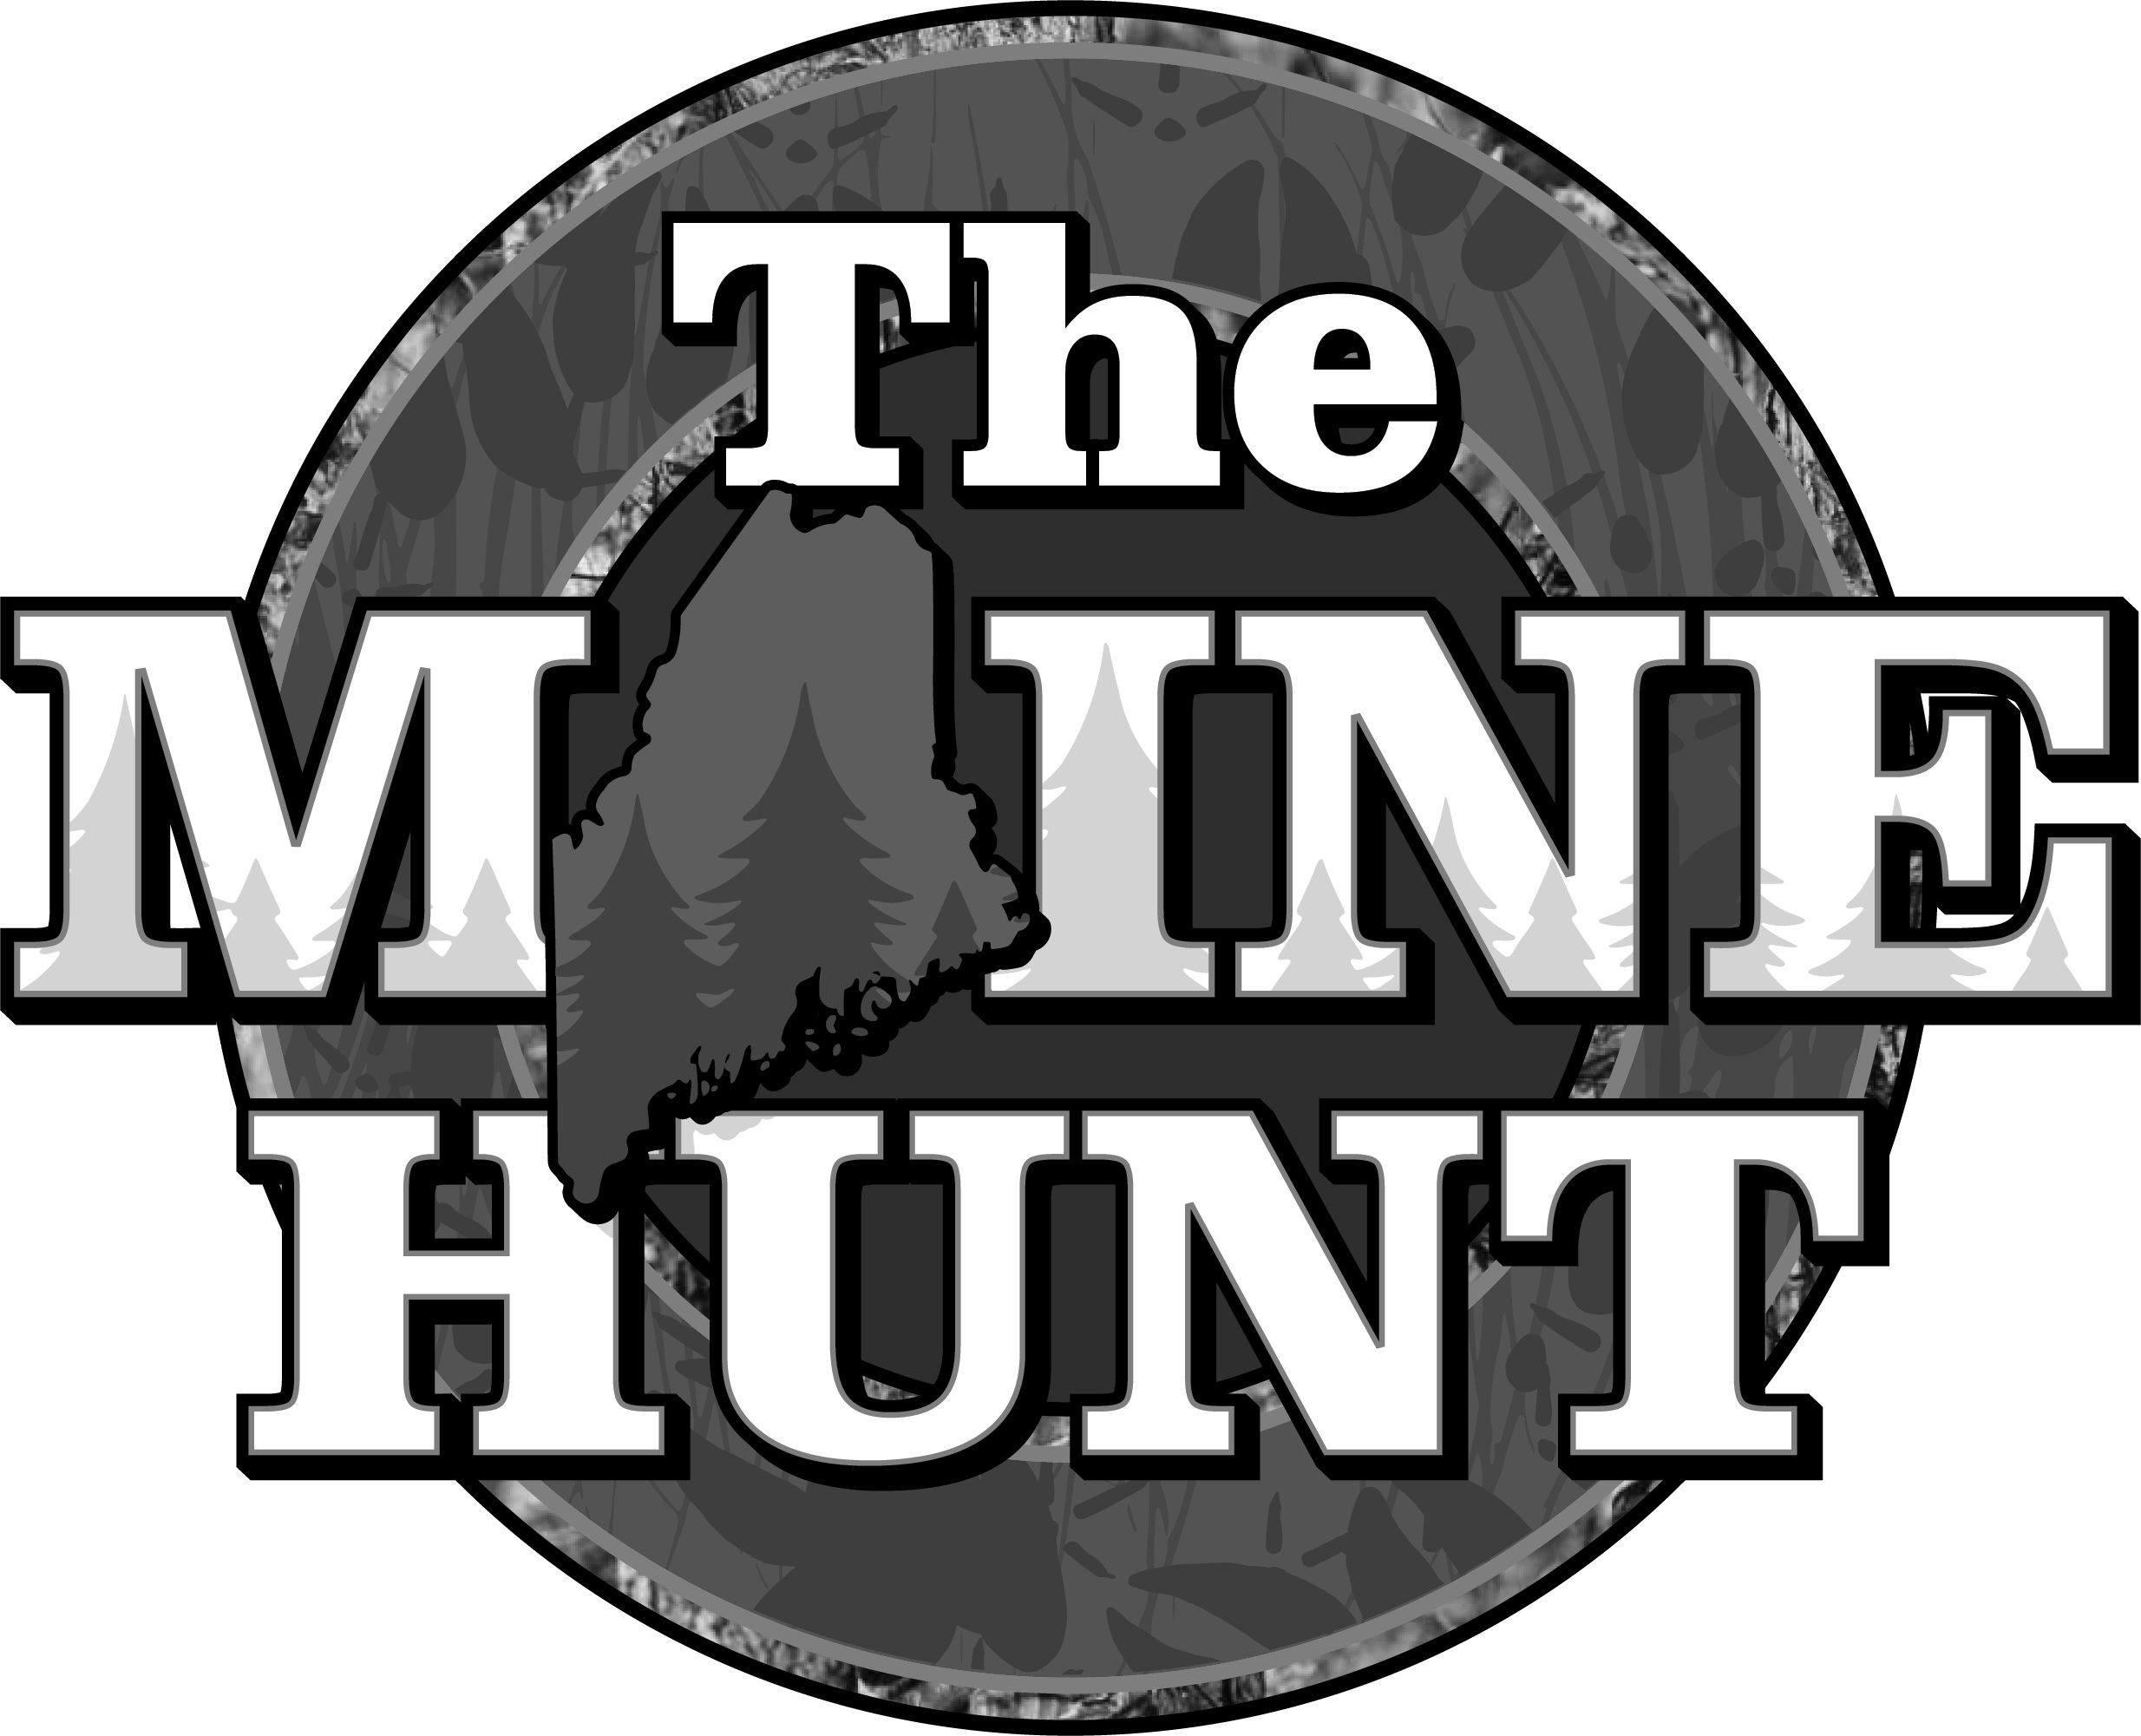 MAINE-HUNT-CENTERED.png